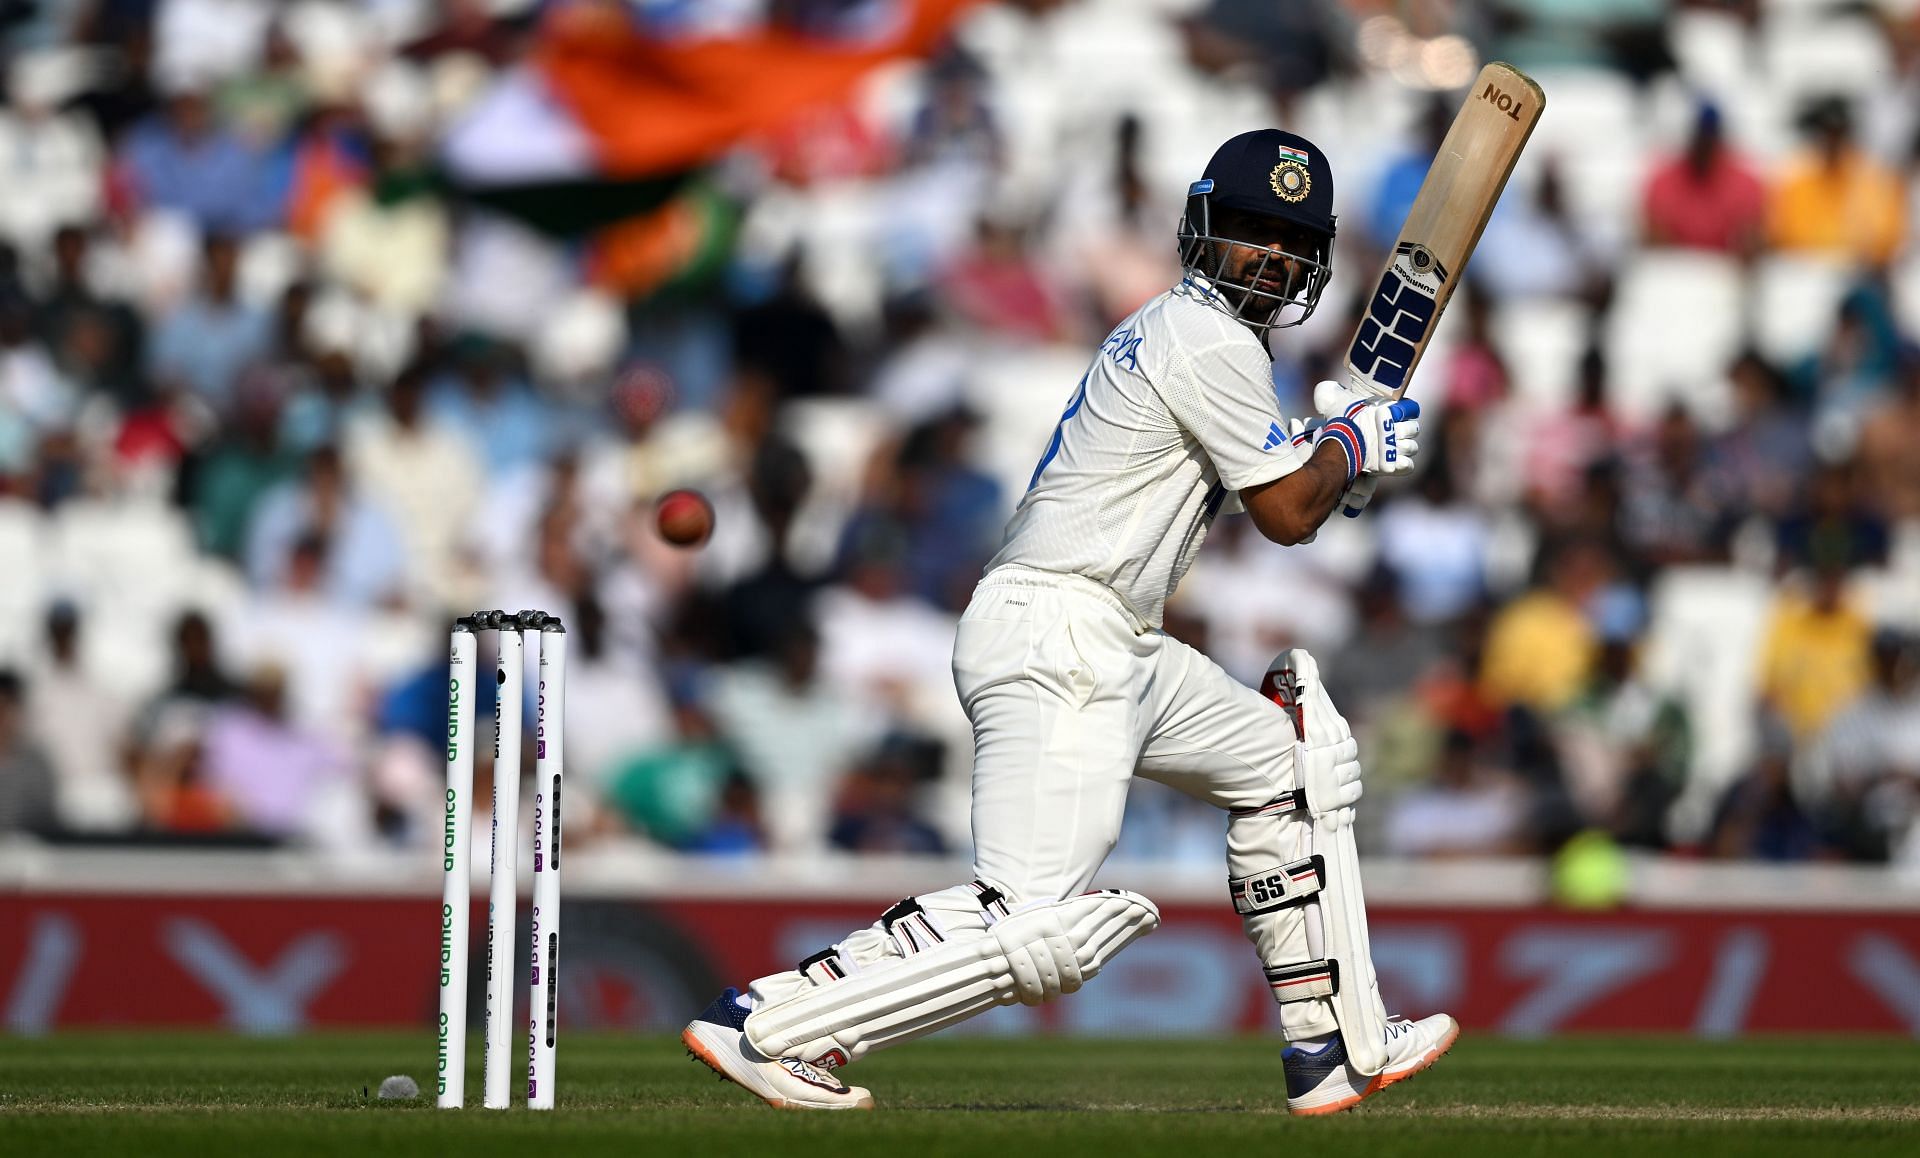 Rahane led from the front with a crucial 73.